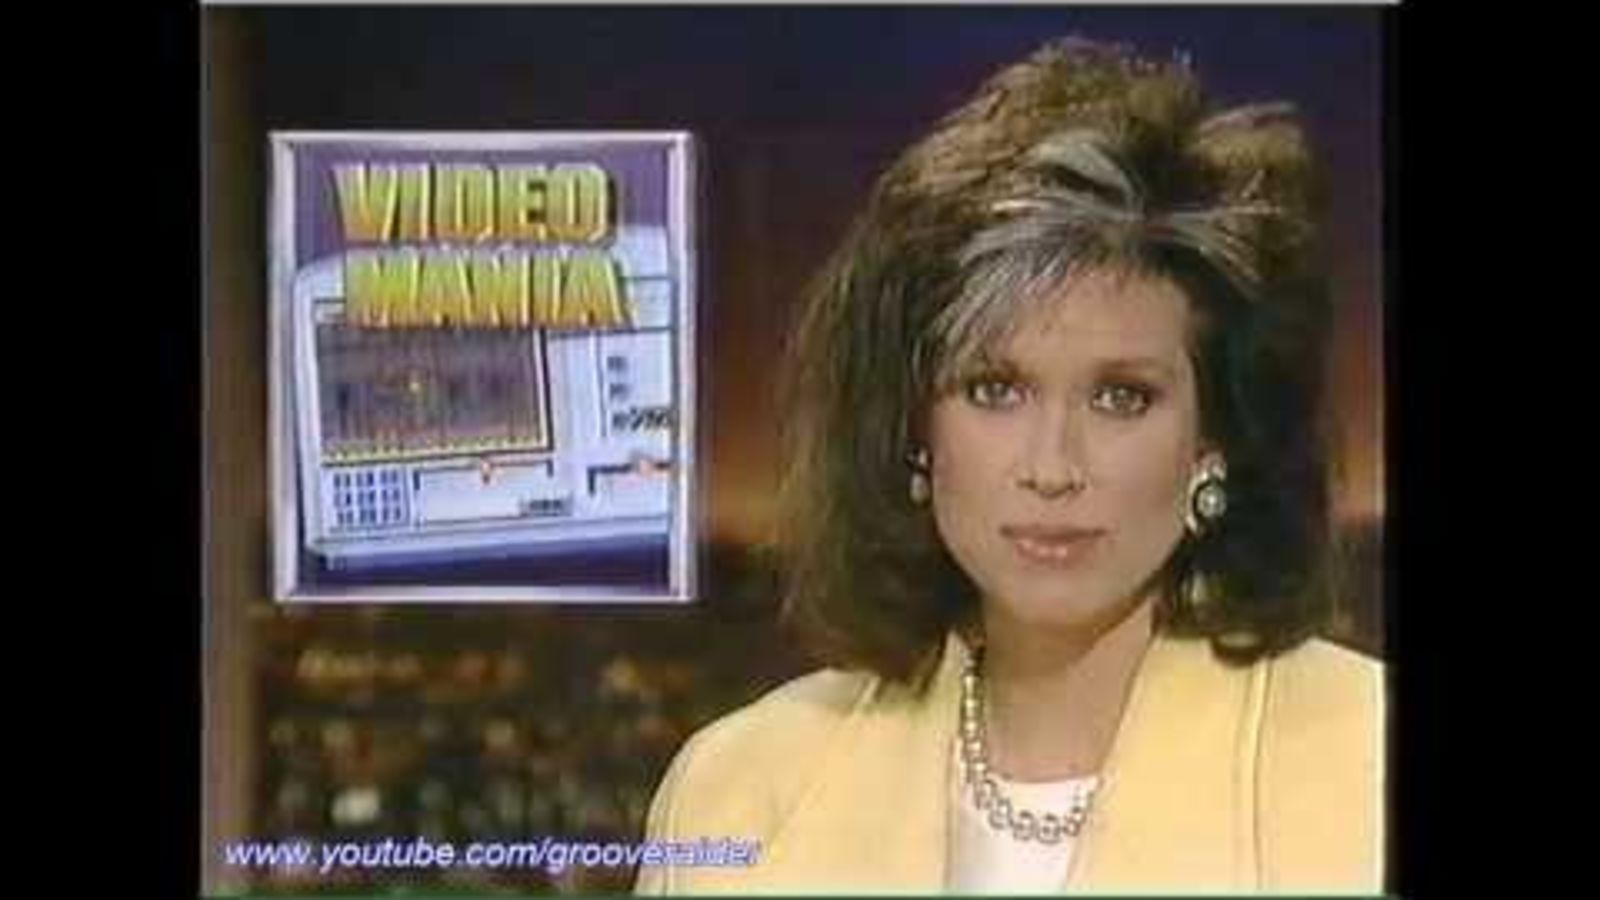 News Reports on Nintendo from the early 90s